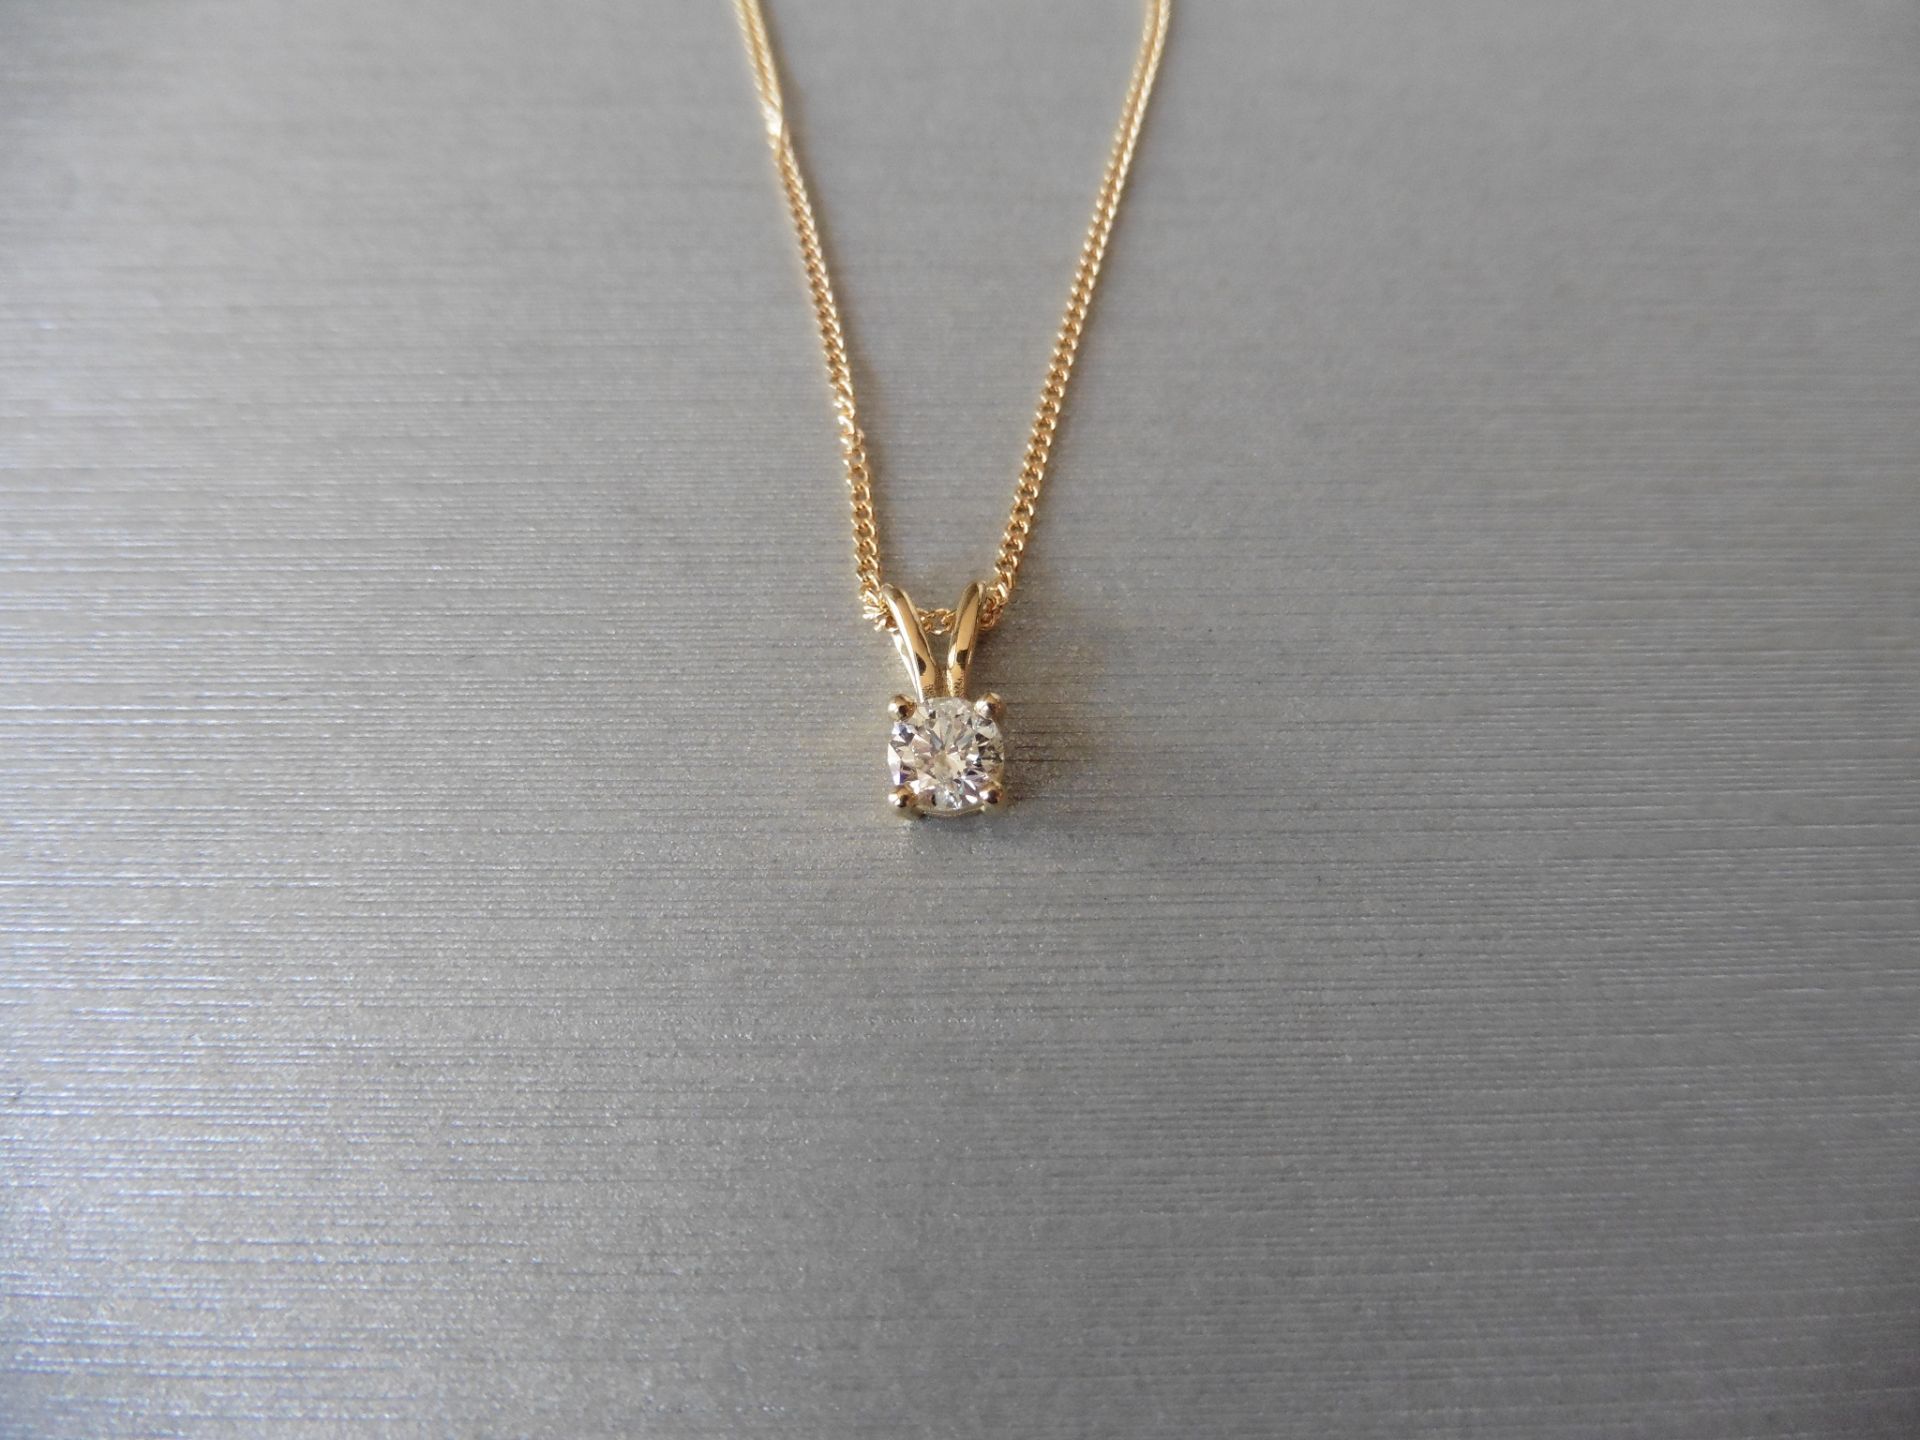 Diamond solitaire style pendant set with a single brilliant cut diamond weighing 0.50ct, H/I